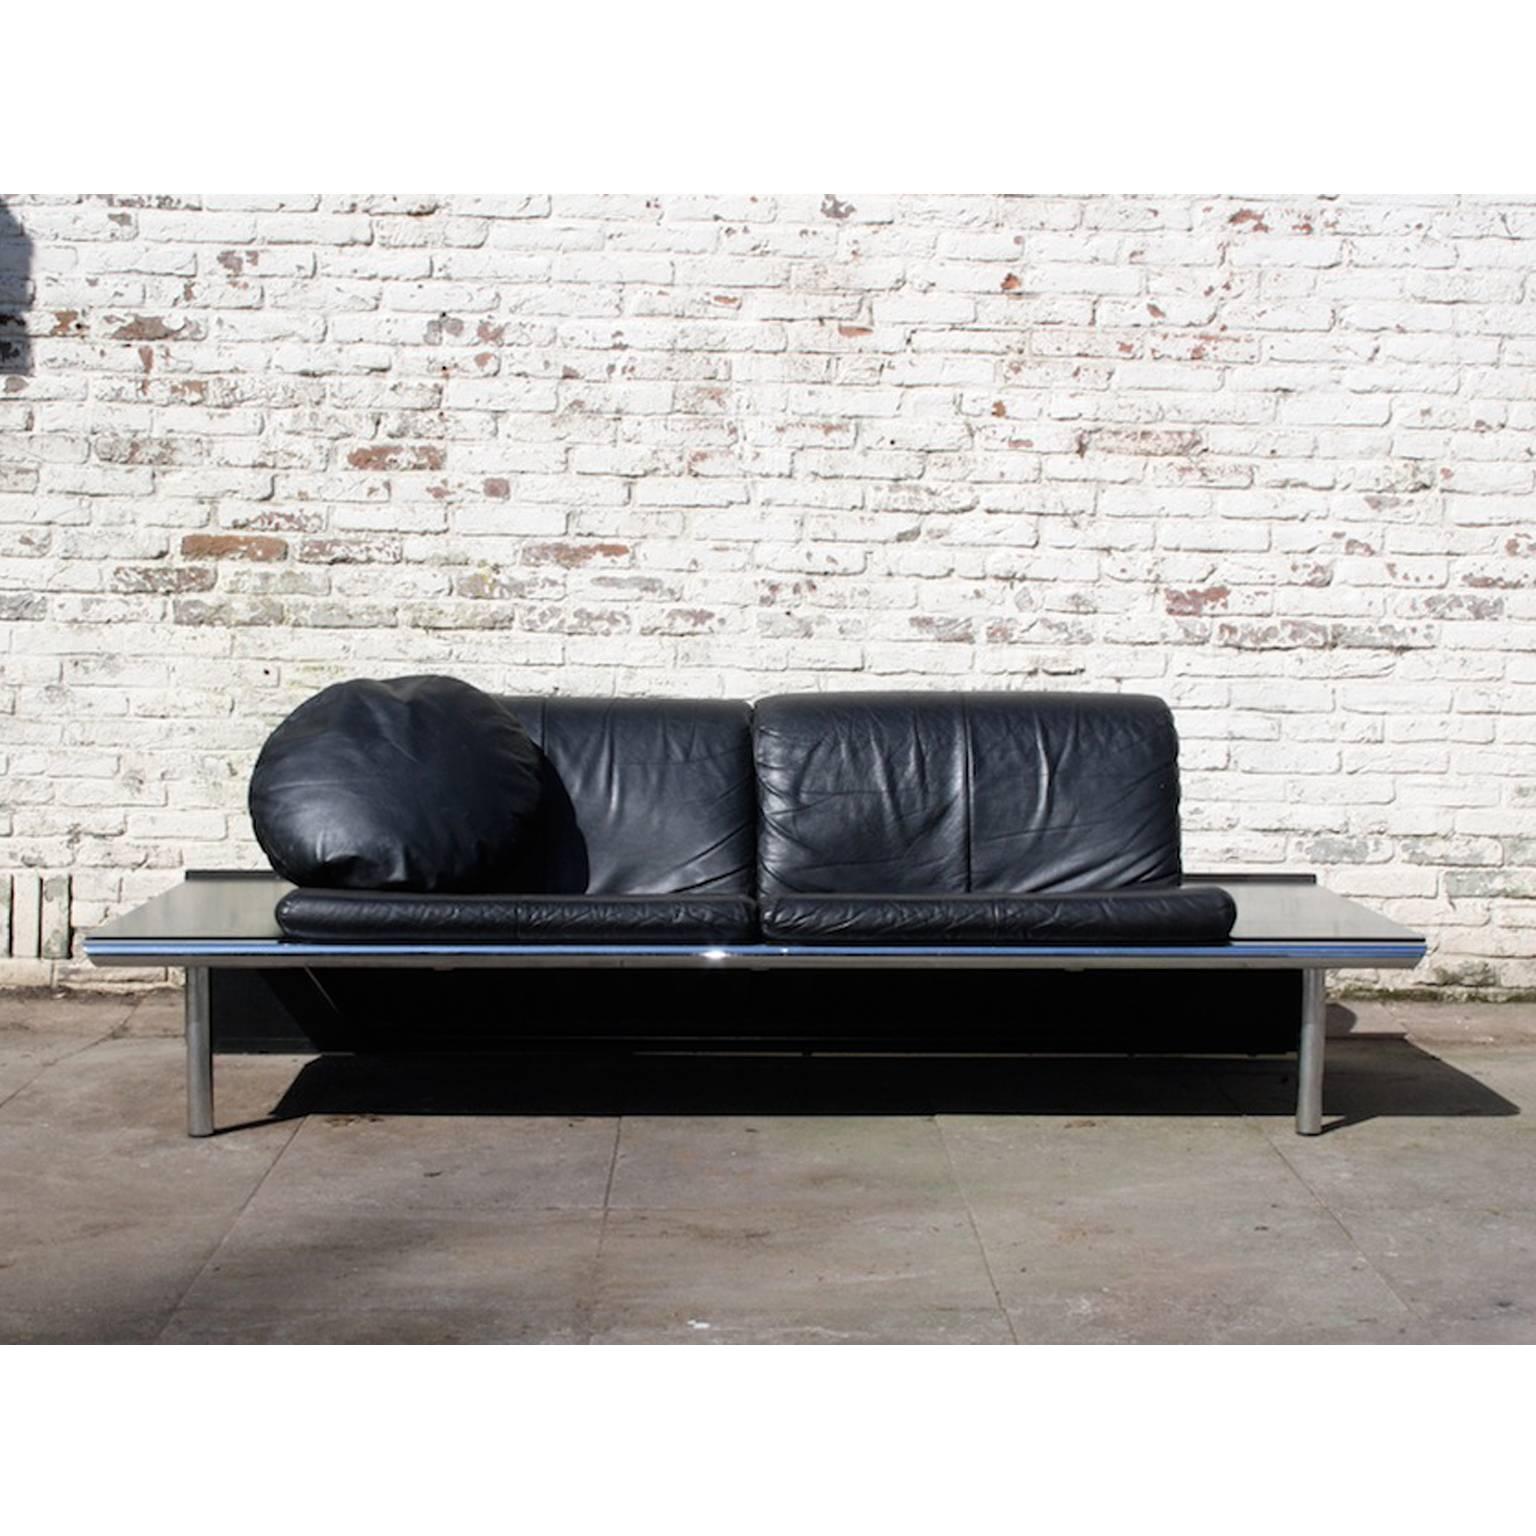 Harvink Mission sofa. Black wooden frame with metal legs and black leather cushions. 

Width: 200cm
Depth: 88 cm; seating 56cm
Height back: 68cm; seating: 43cm
Height table: 32cm.